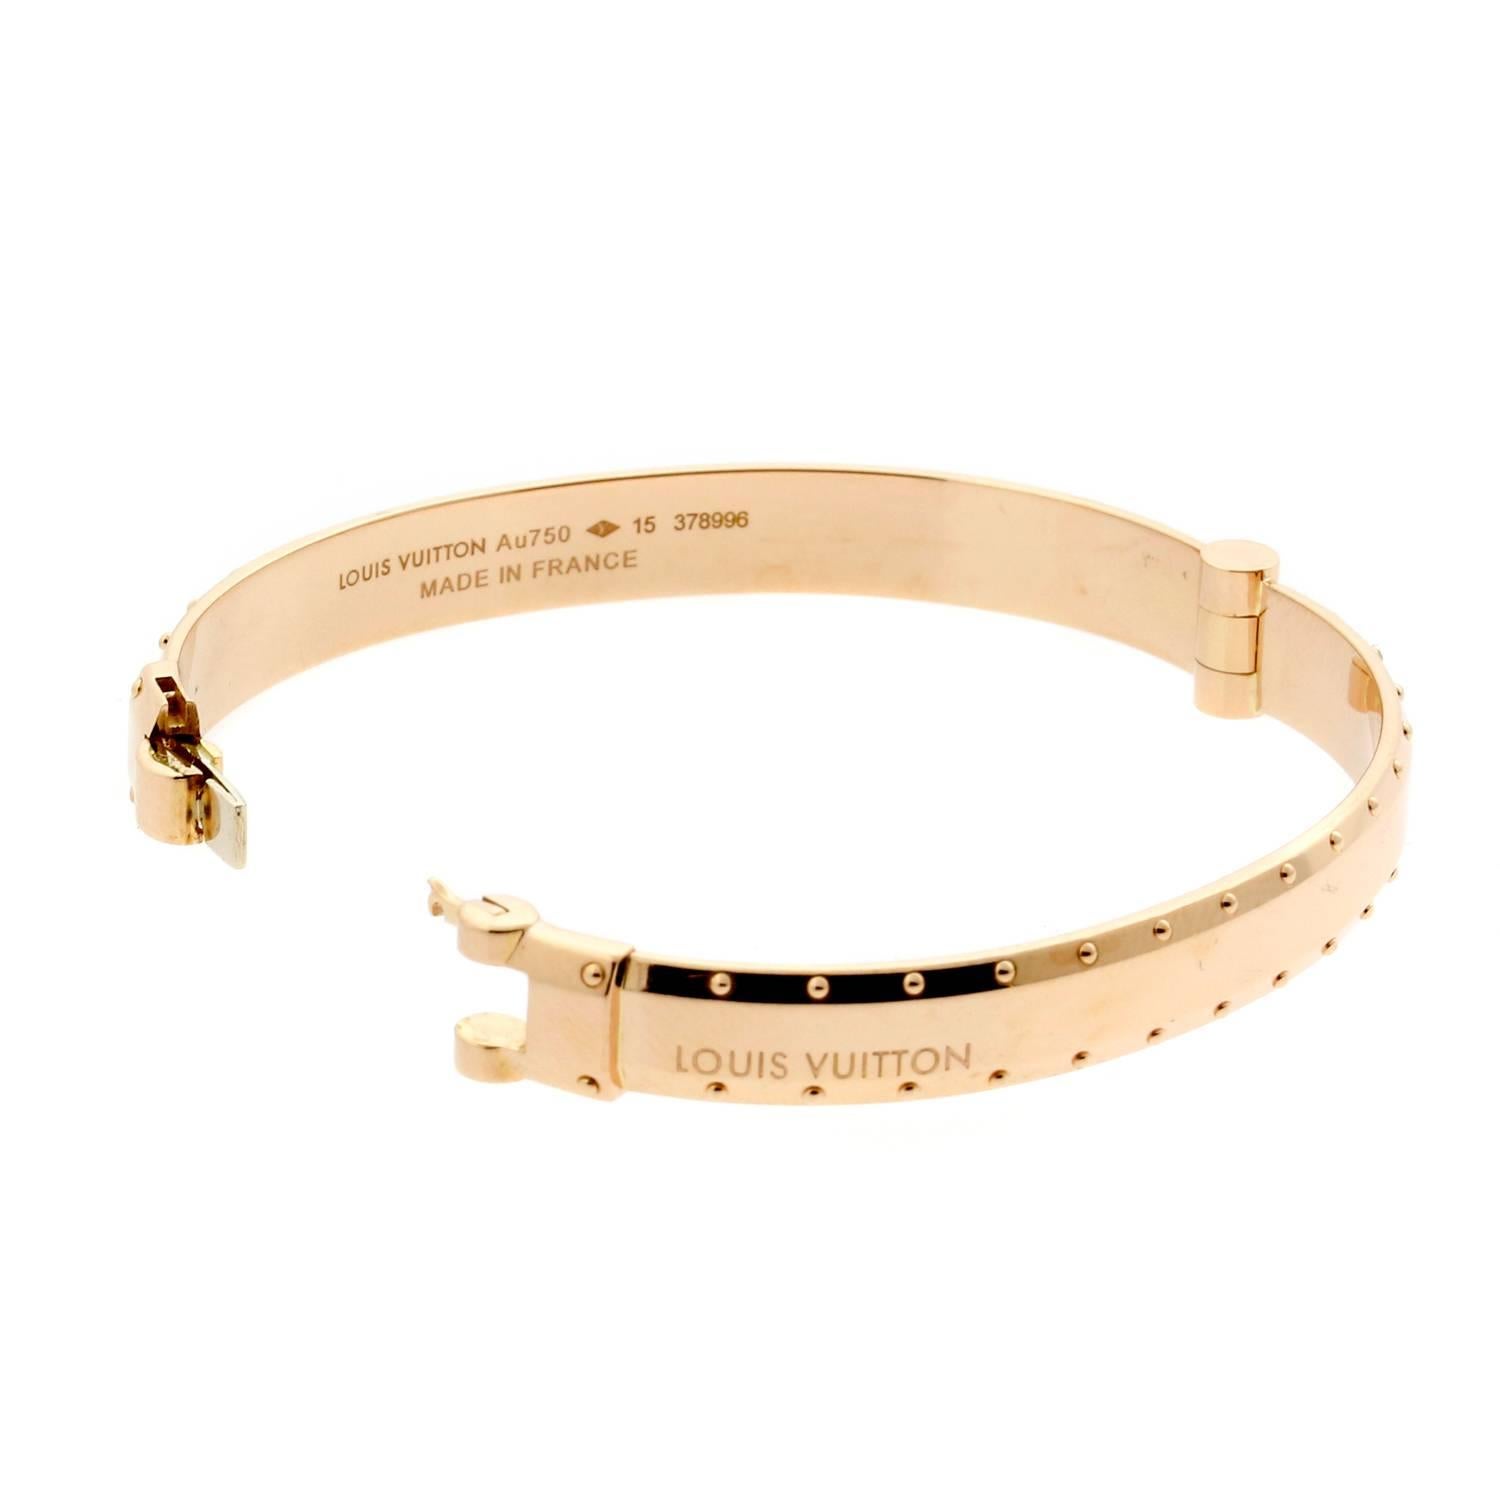 A Louis Vuitton bangle bracelet from the Emprise collection featuring bold sharp lines in this contemporary design set in 18k rose gold.

Size: 15cm 

Inventory ID : 0000569